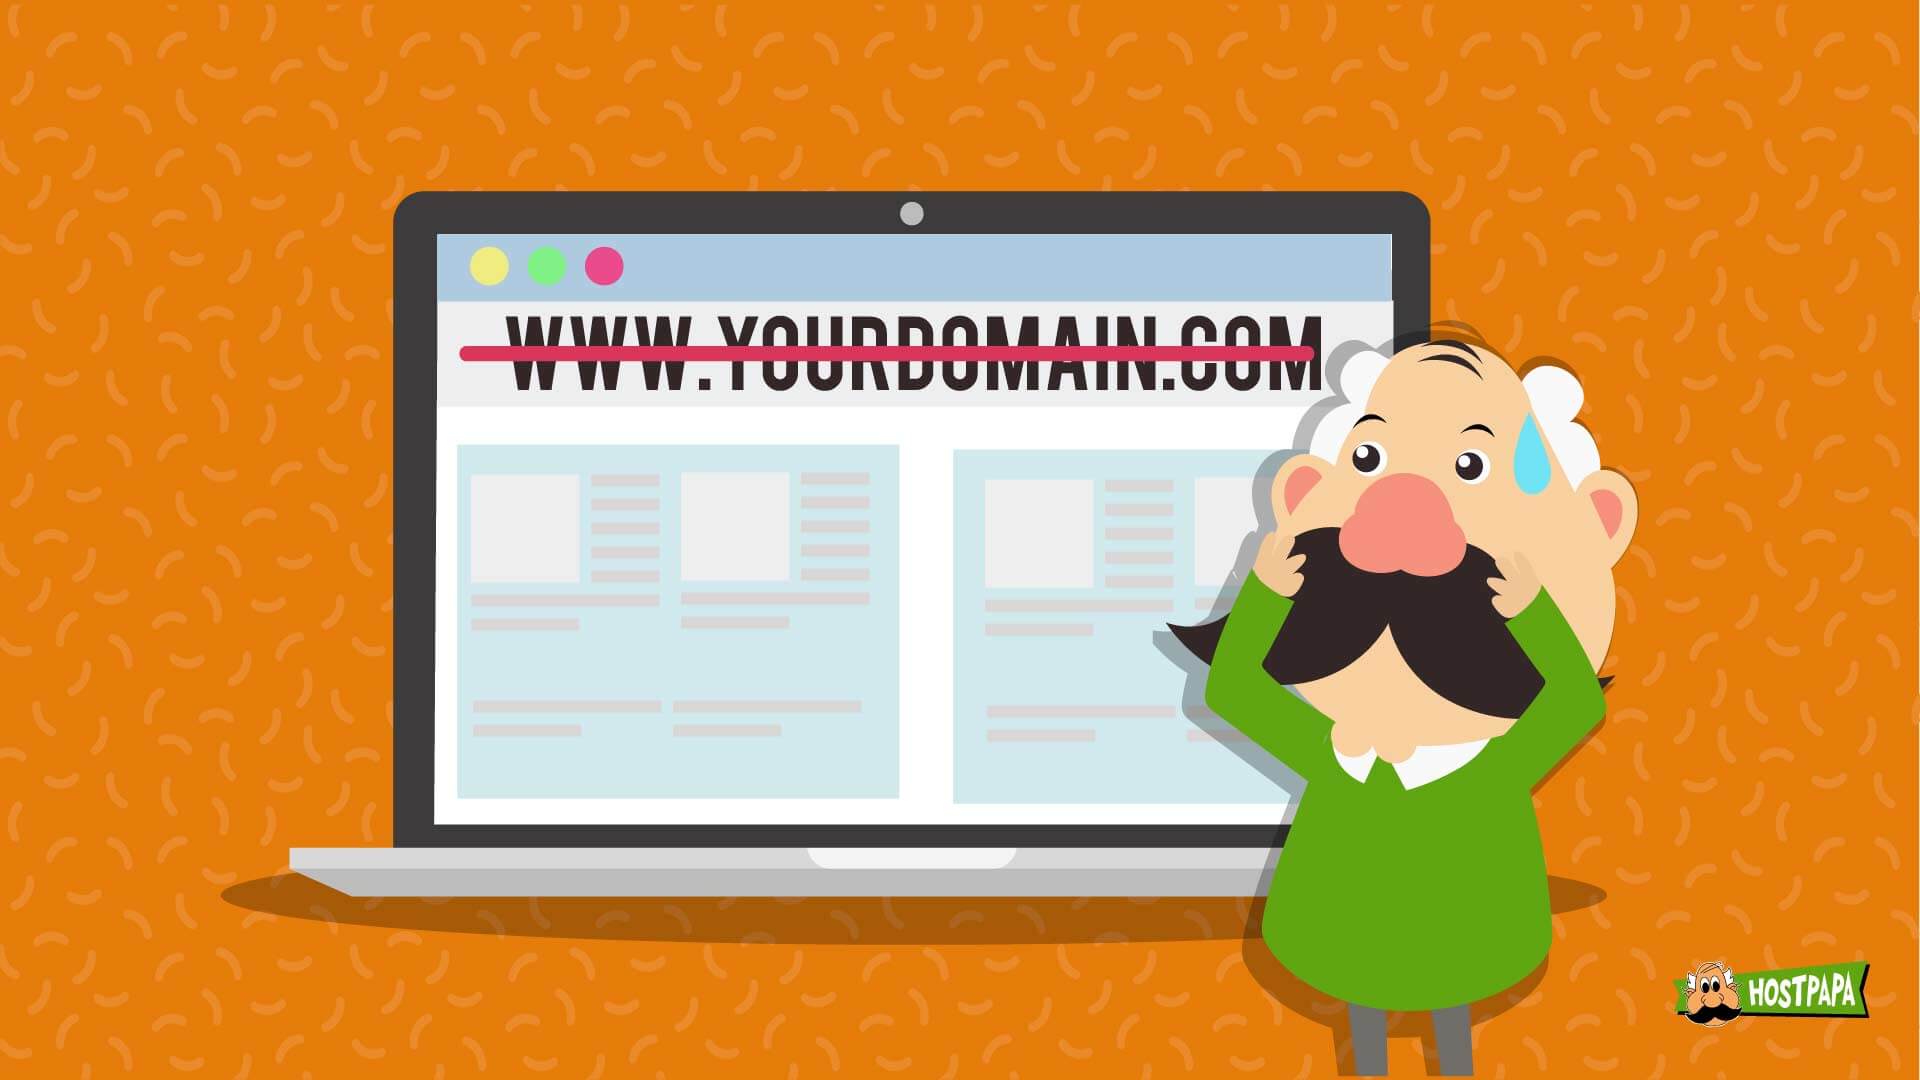 Check these tips to learn what to do if your domain name is taken